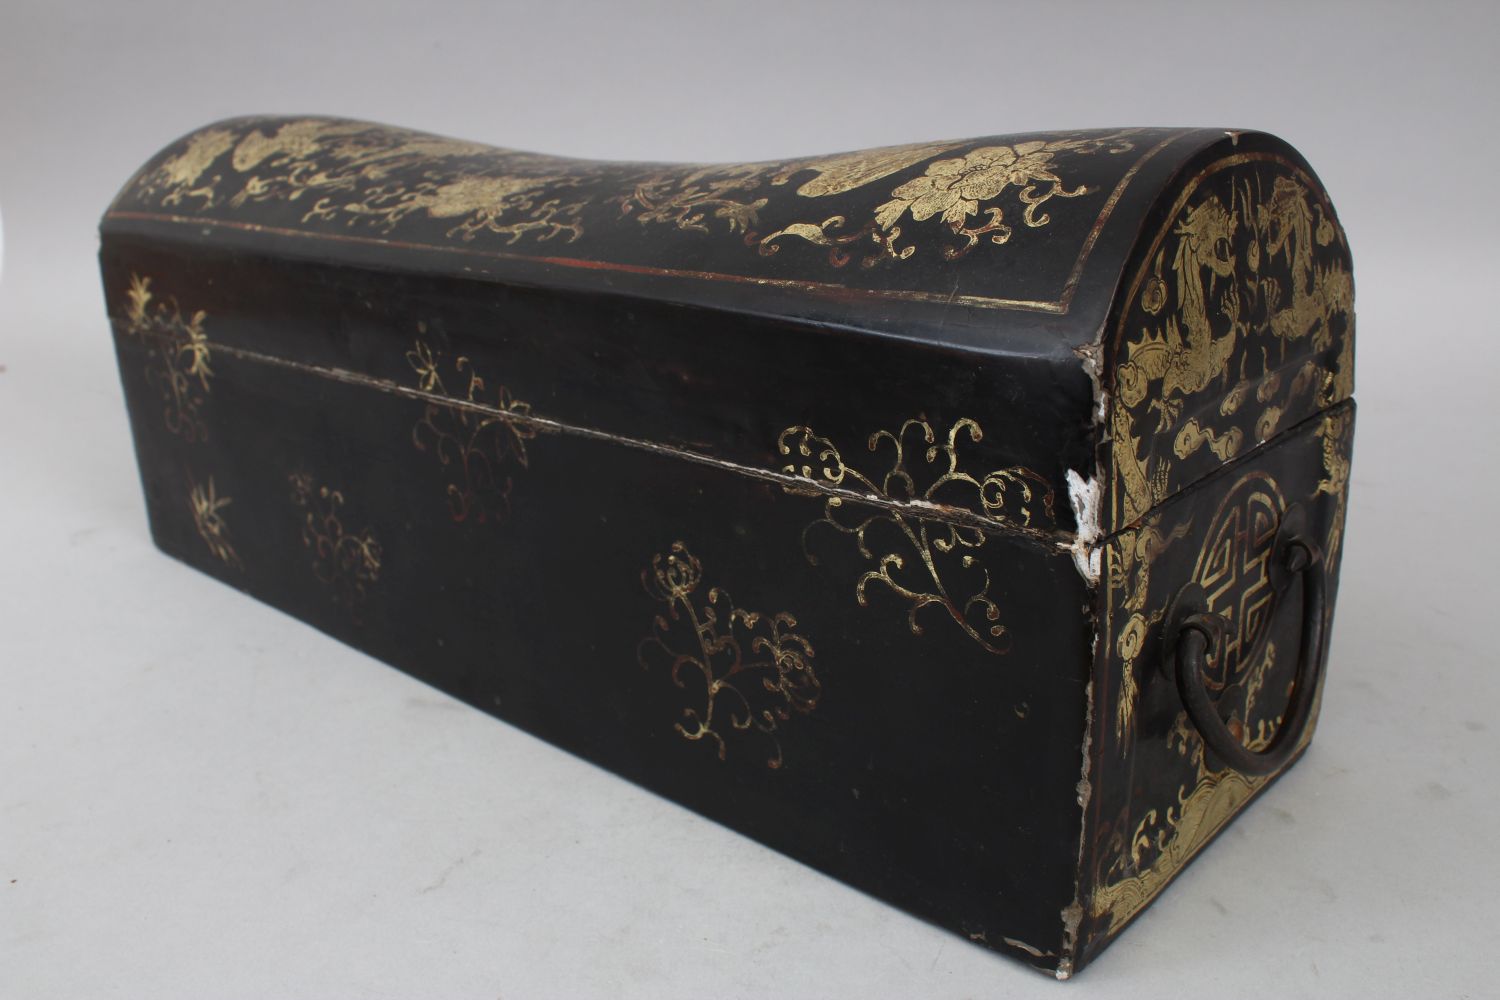 A GOOD 19TH CENTURY CHINESE LACQUER CHEST / BOX, the lacquer box with gilded decoration of dragons - Image 12 of 12